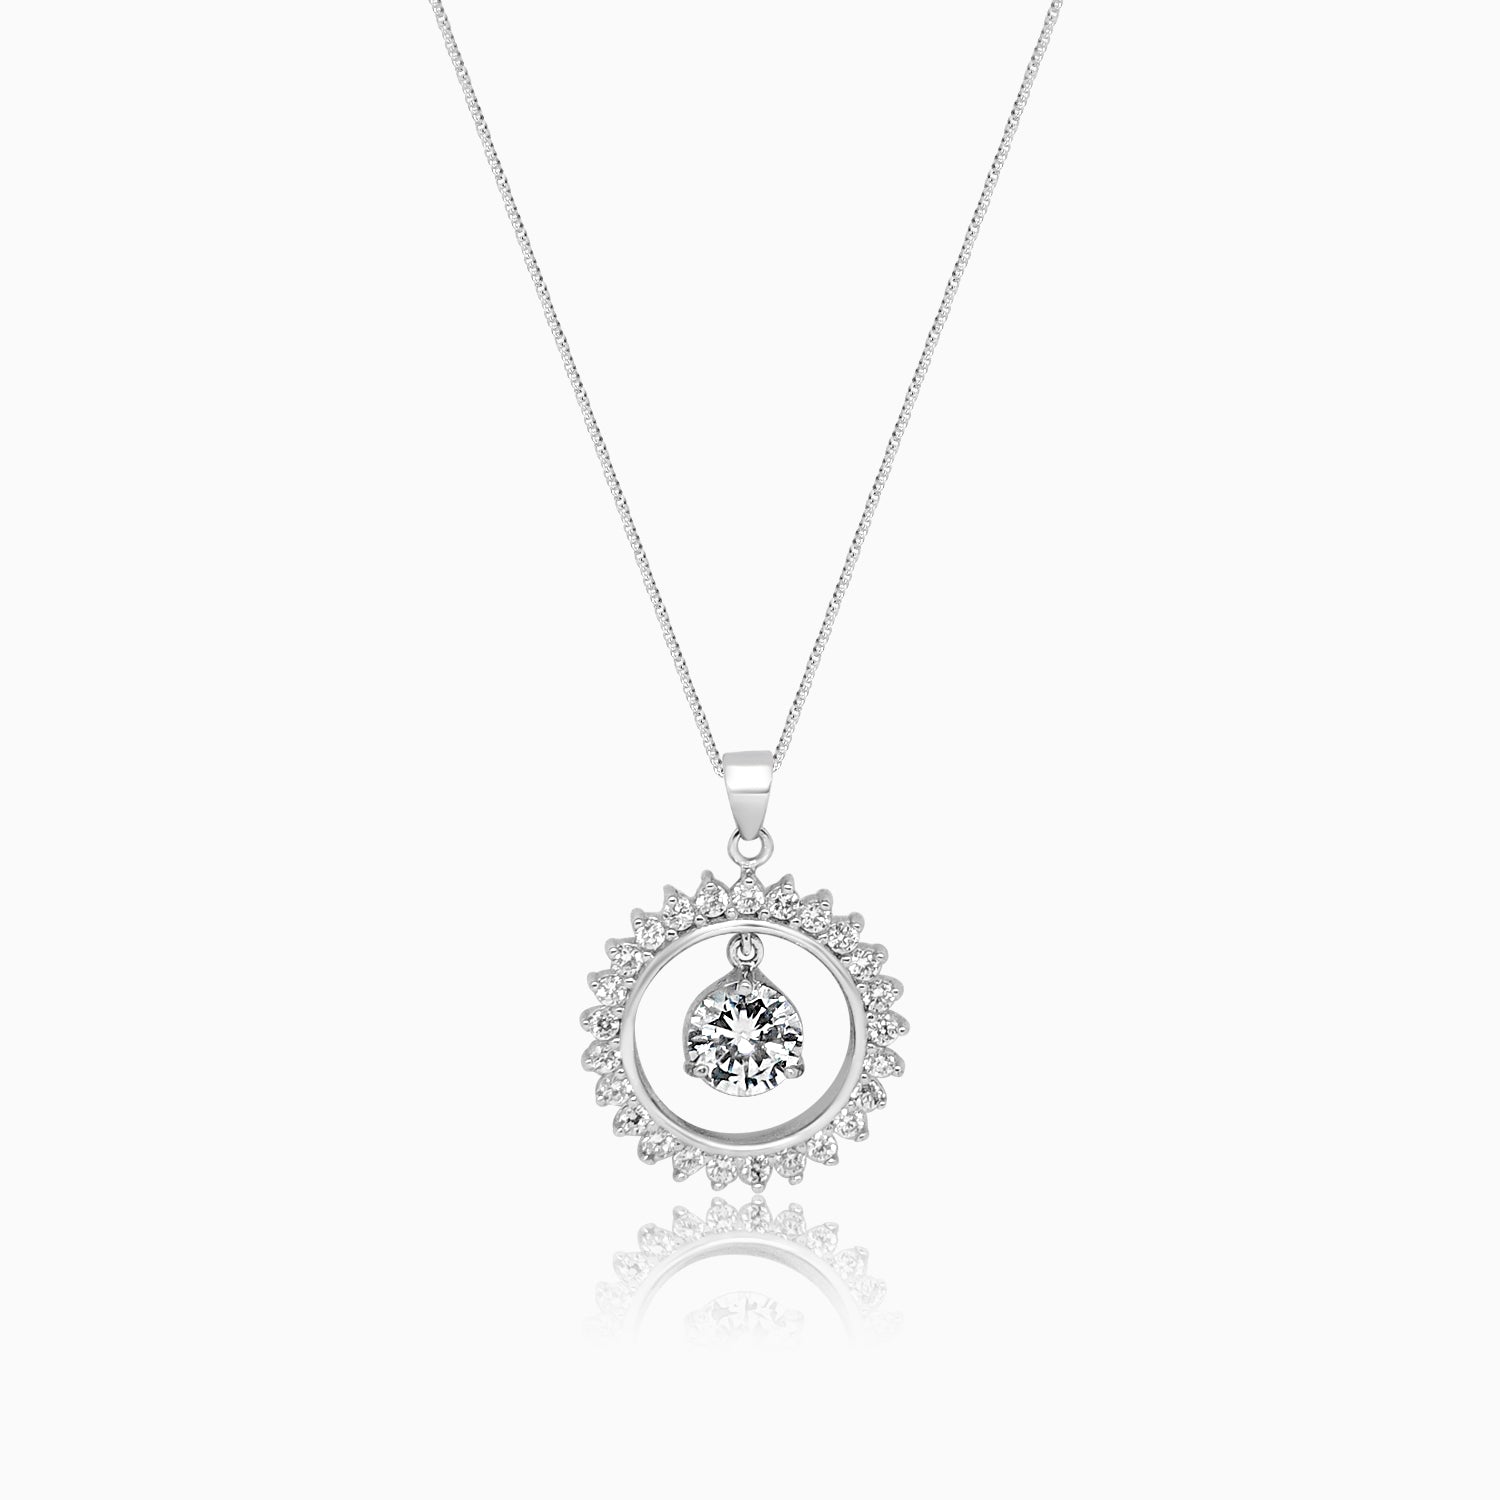 Silver Dangling Grandeur Solitaire in Sparkling Ring of Fire Pendant